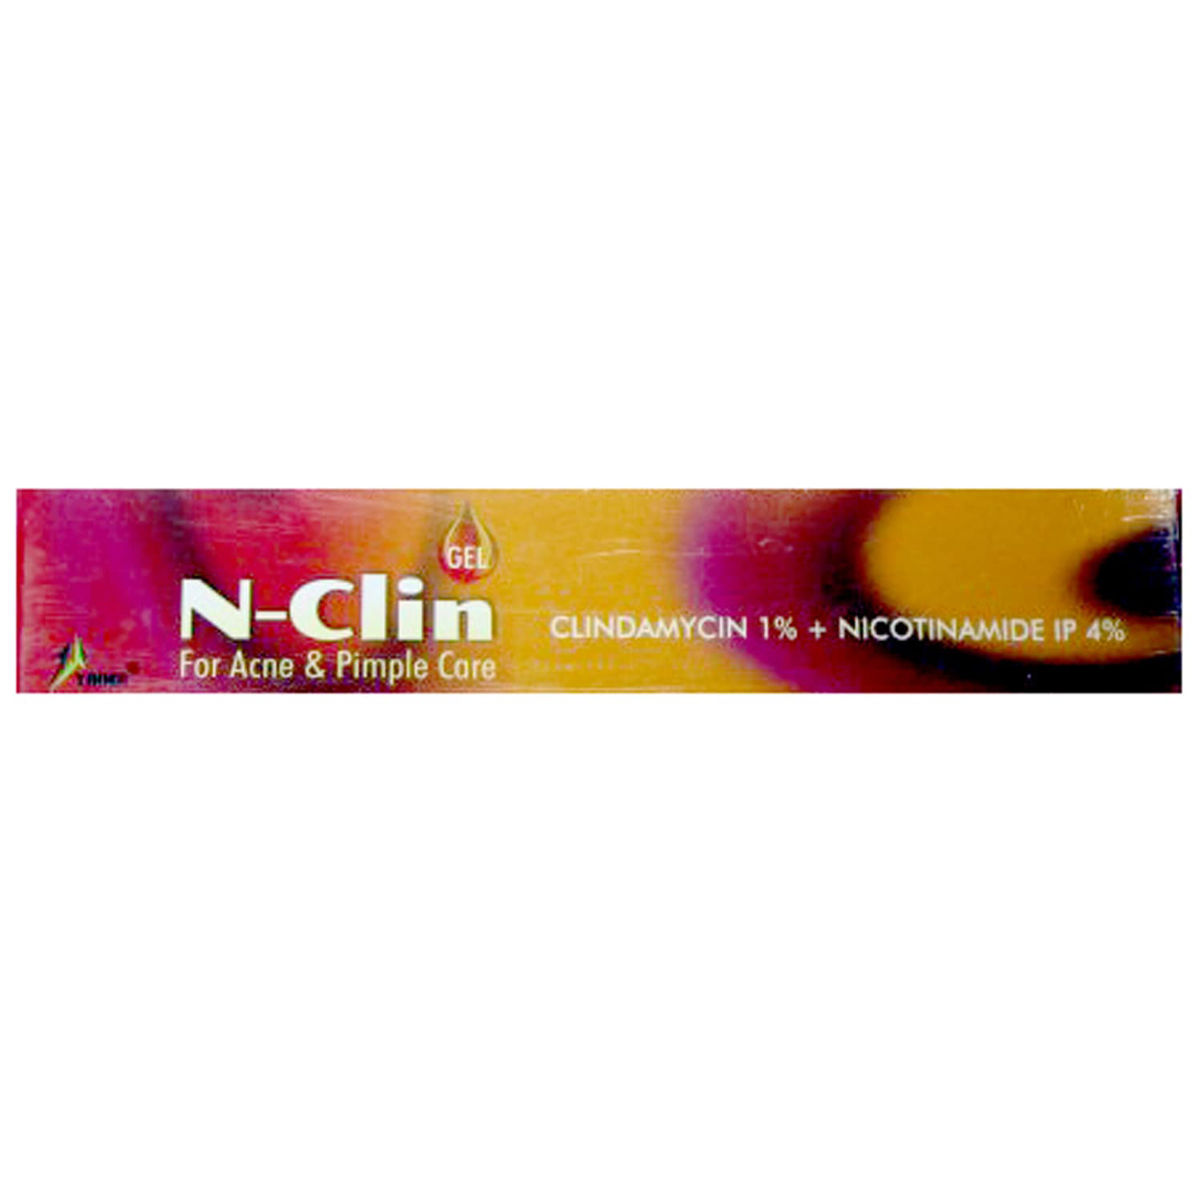 N-Clin Gel, 15 gm Price, Uses, Side Effects, Composition - Apollo ...